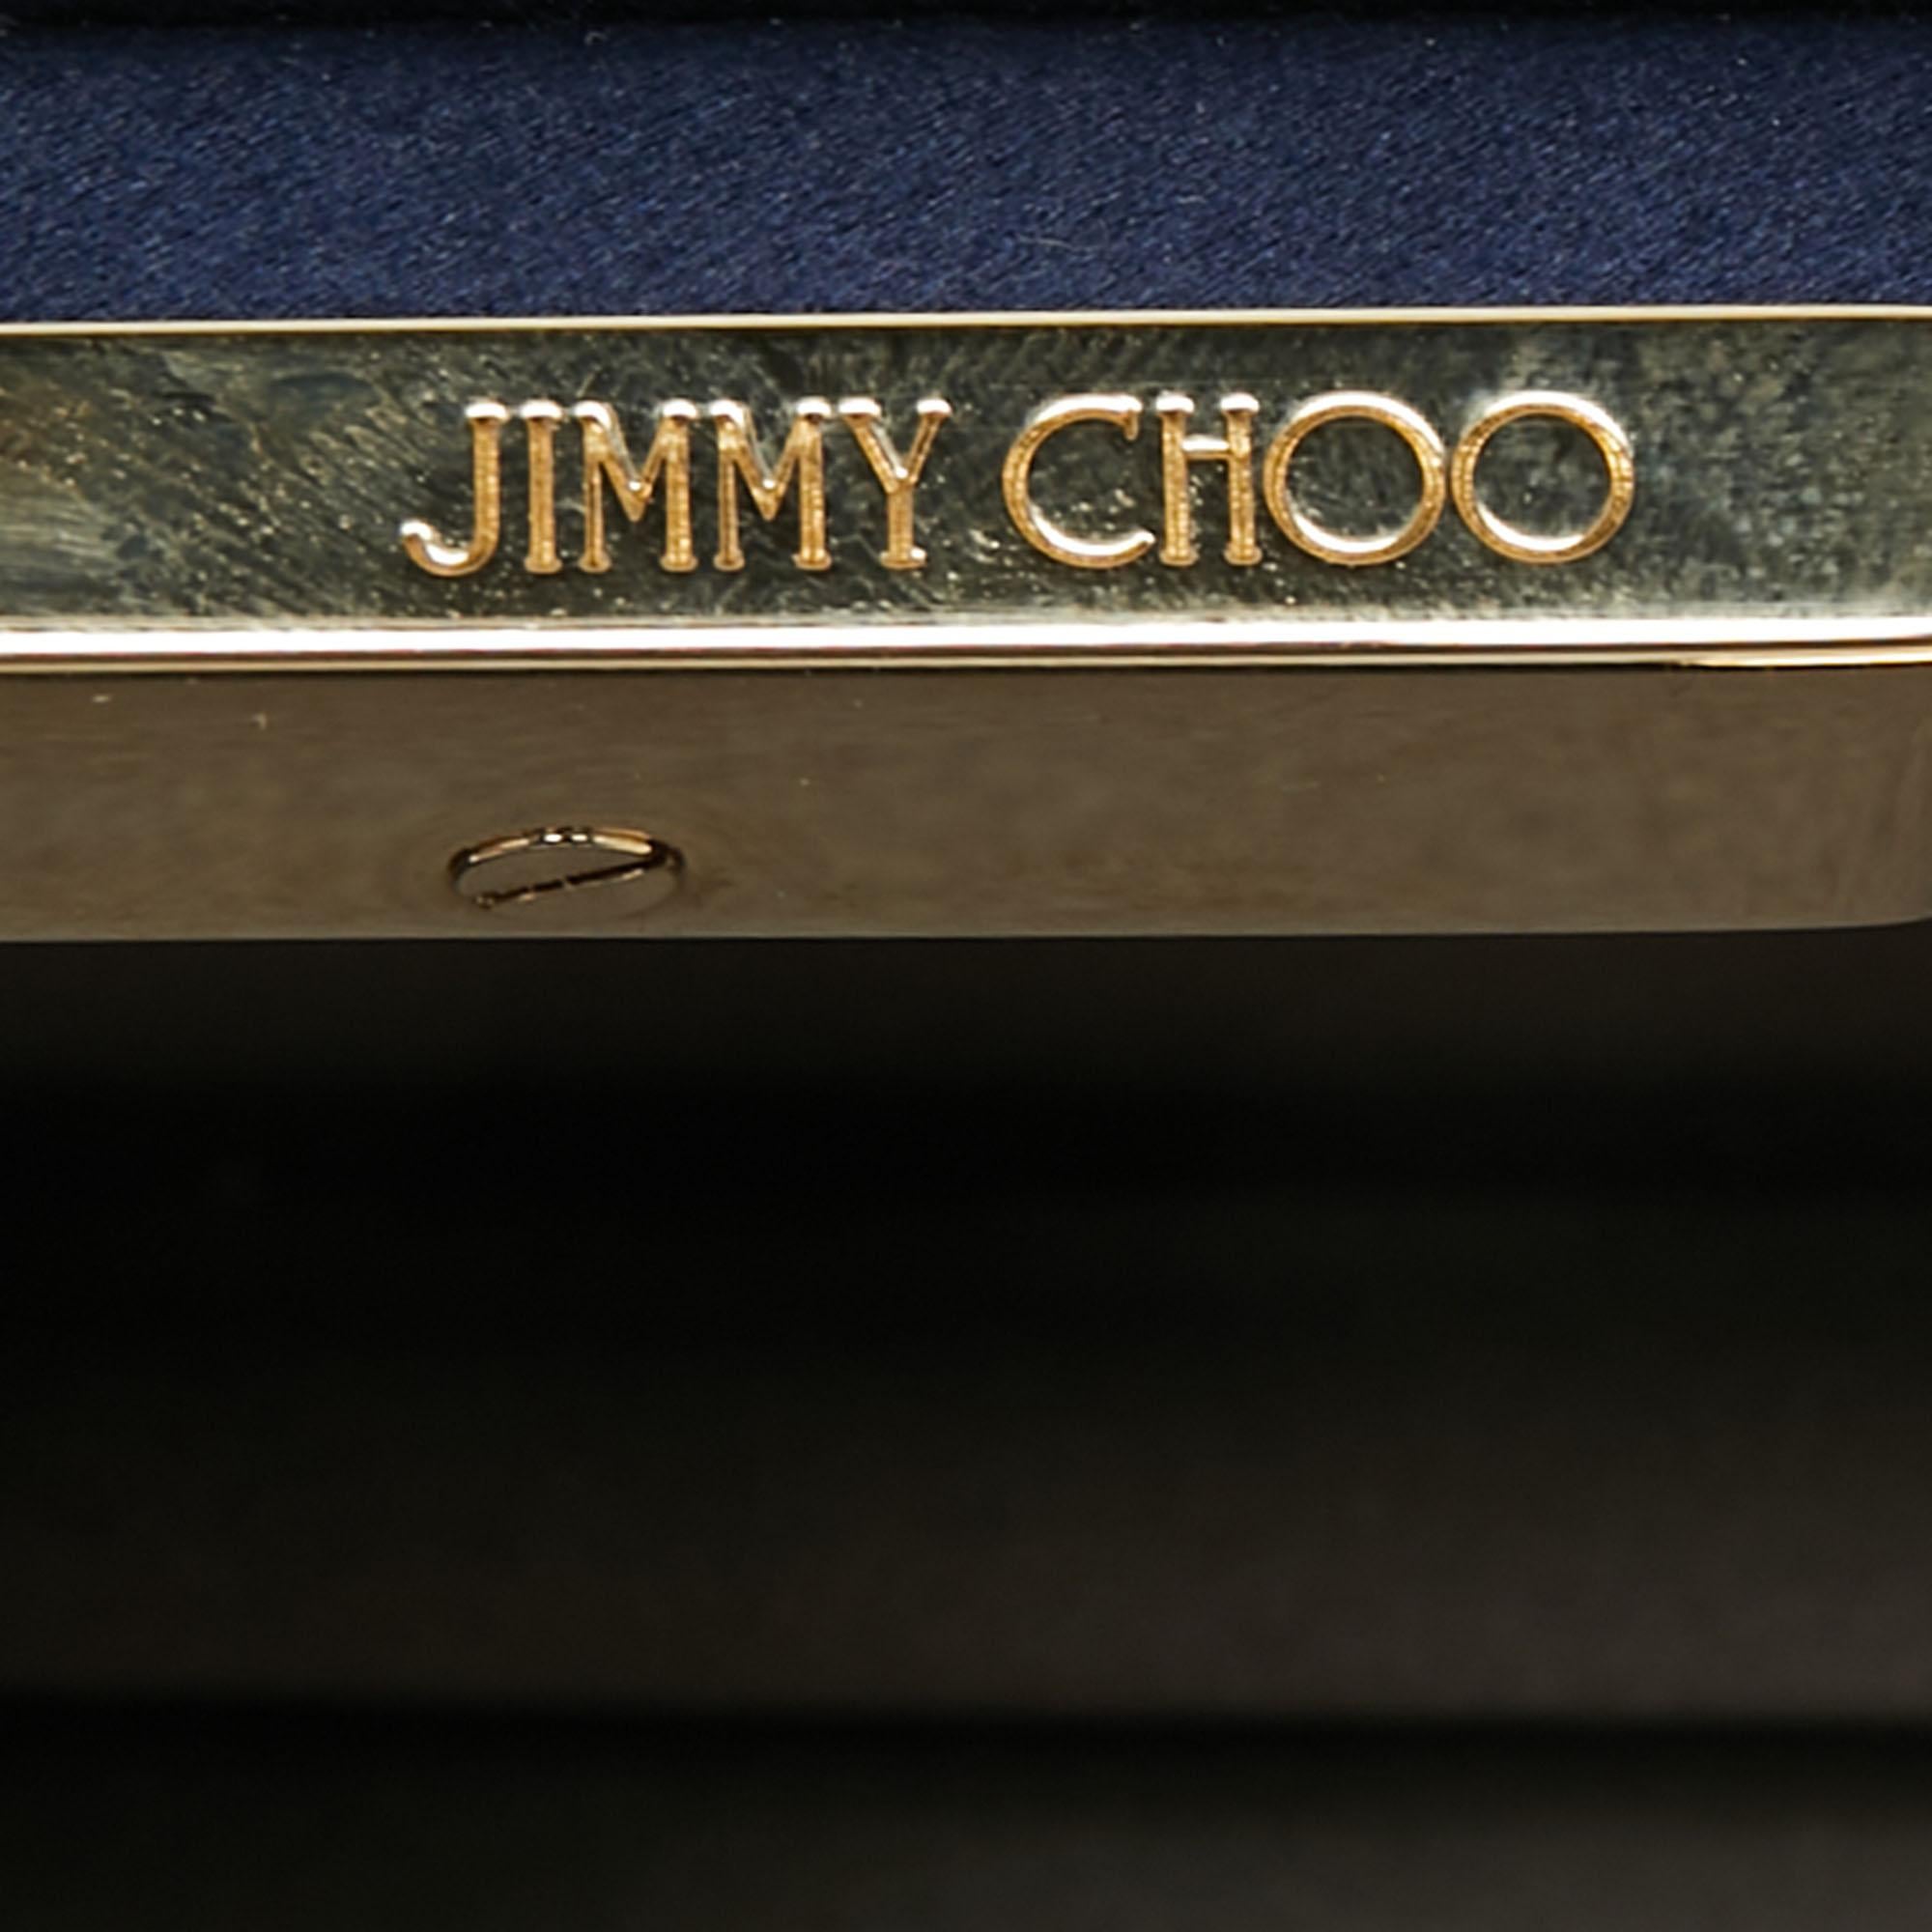 This clutch from Jimmy Choo has an appealing design, perfect to complement an evening dress or a day ensemble. Crafted from navy blue satin and gold-tone metal, the creation has a luxe appeal, a lined interior, and a shoulder chain.

Includes: